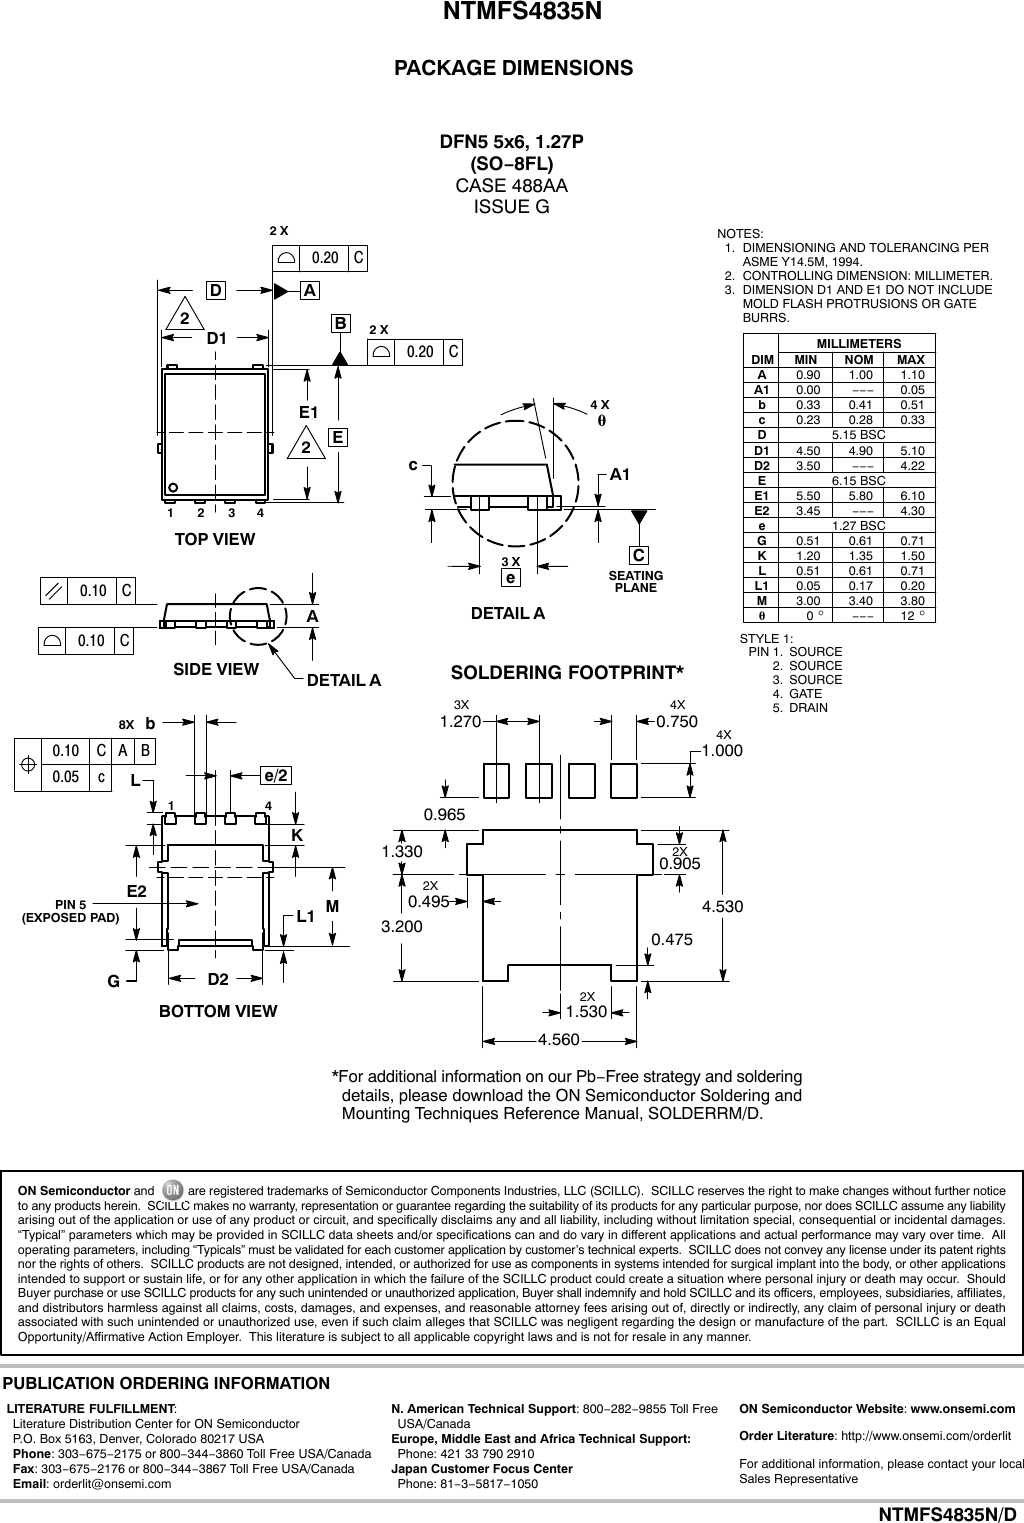 Page 7 of 8 - NTMFS4835N - Datasheet. Www.s-manuals.com. R7 On